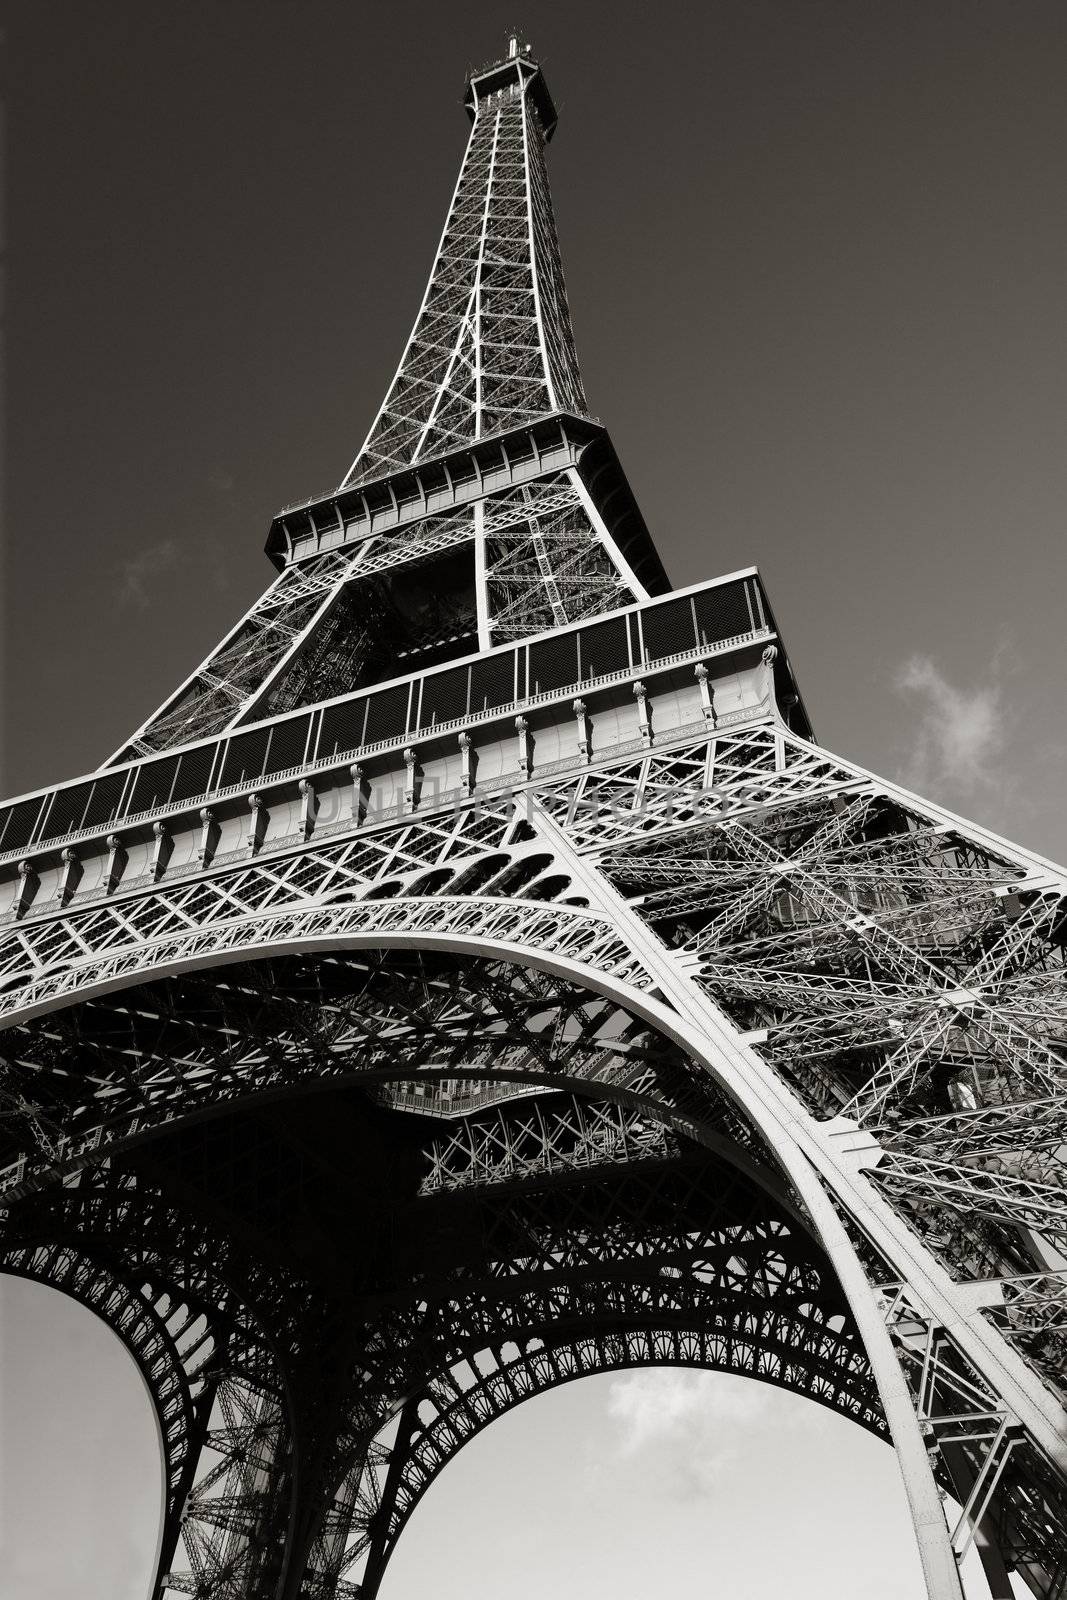 The Eiffel Tower by sumners